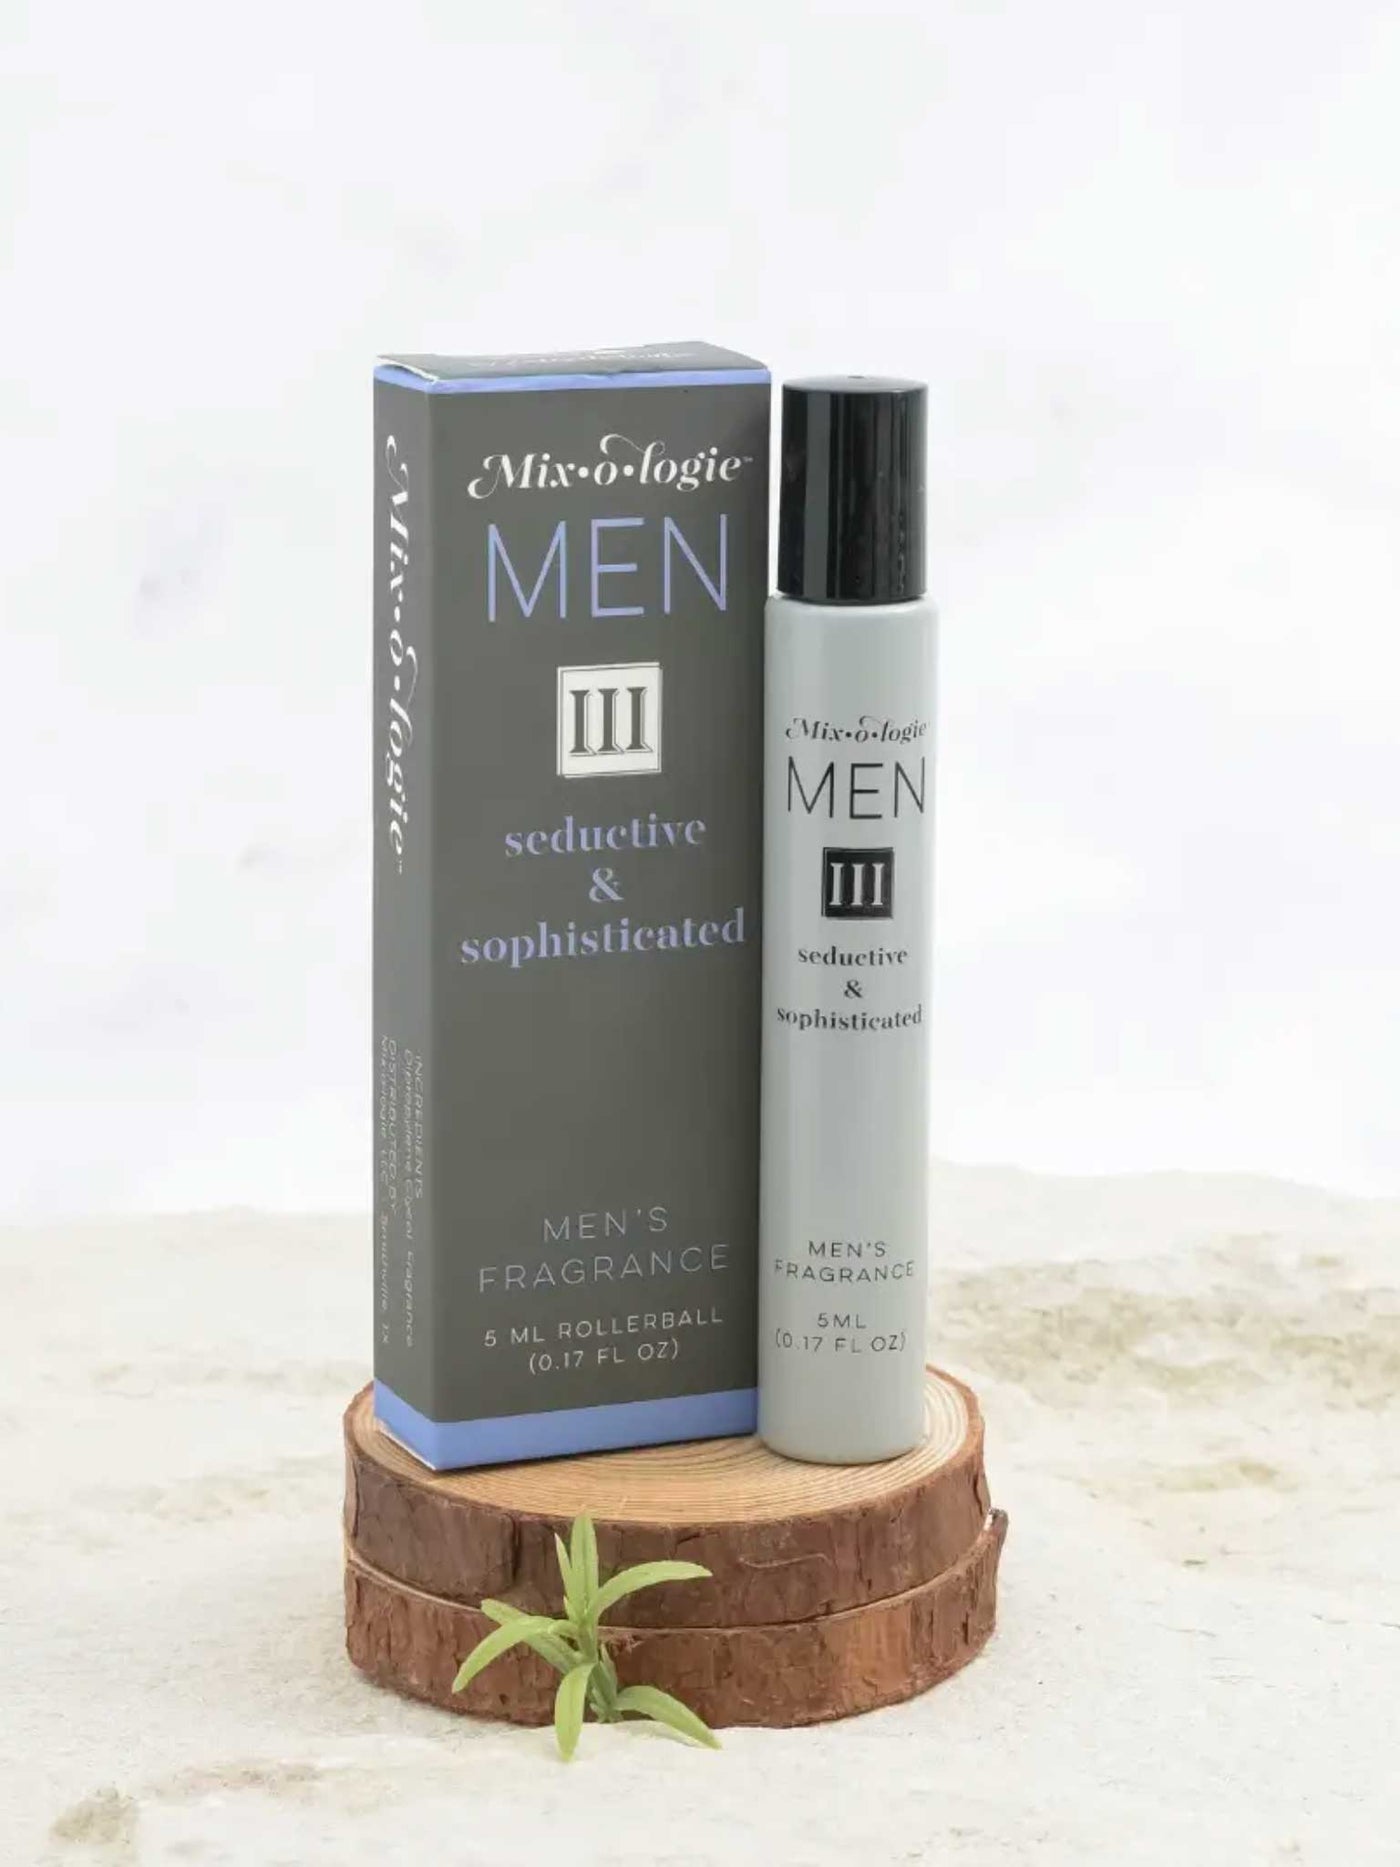 Men III (Seductive & Sophisticated) Rollerball Cologne